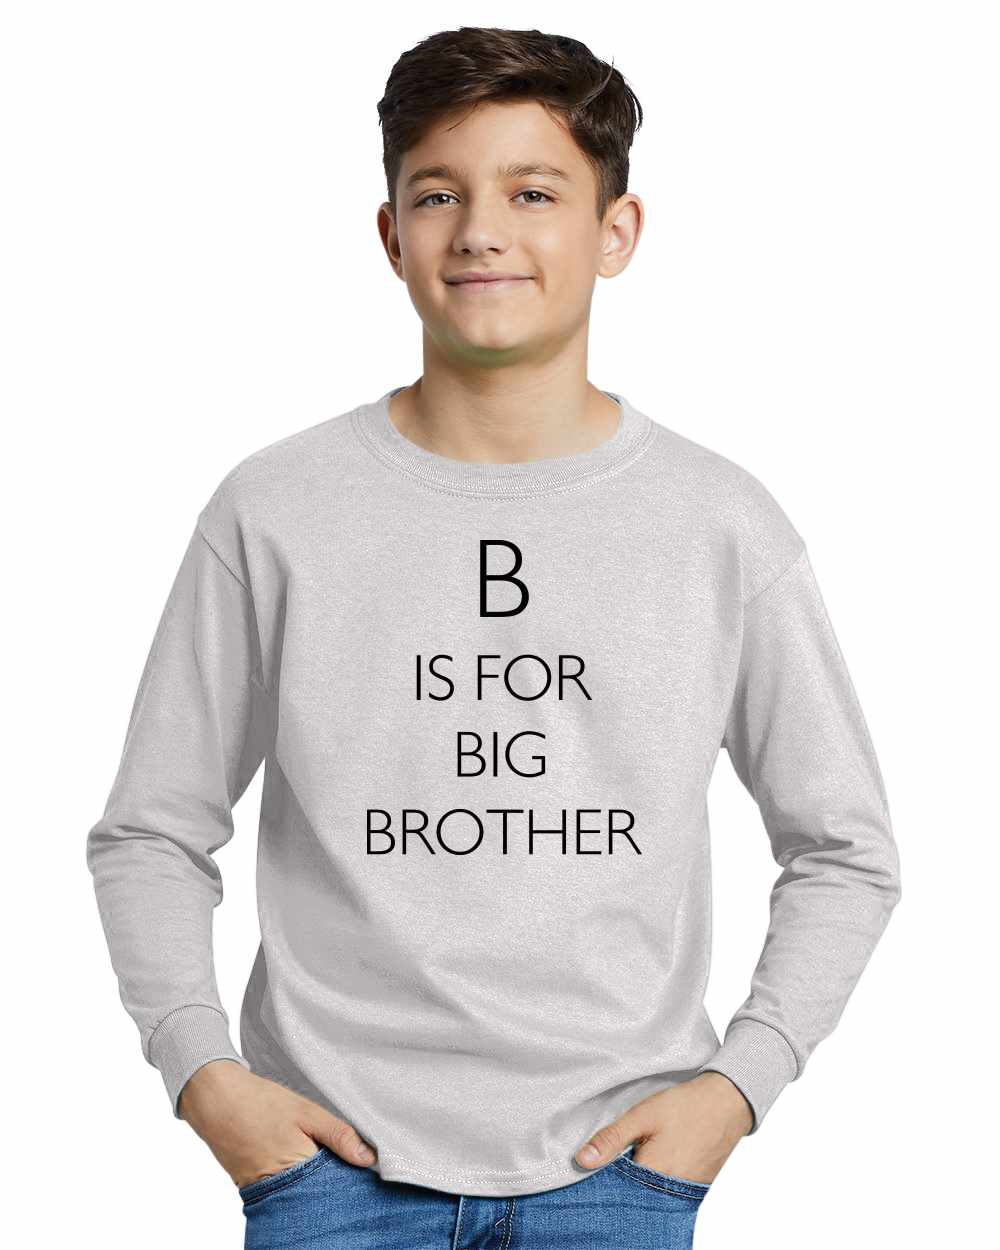 B is for Big Brother on Youth Long Sleeve Shirt (#1179-203)